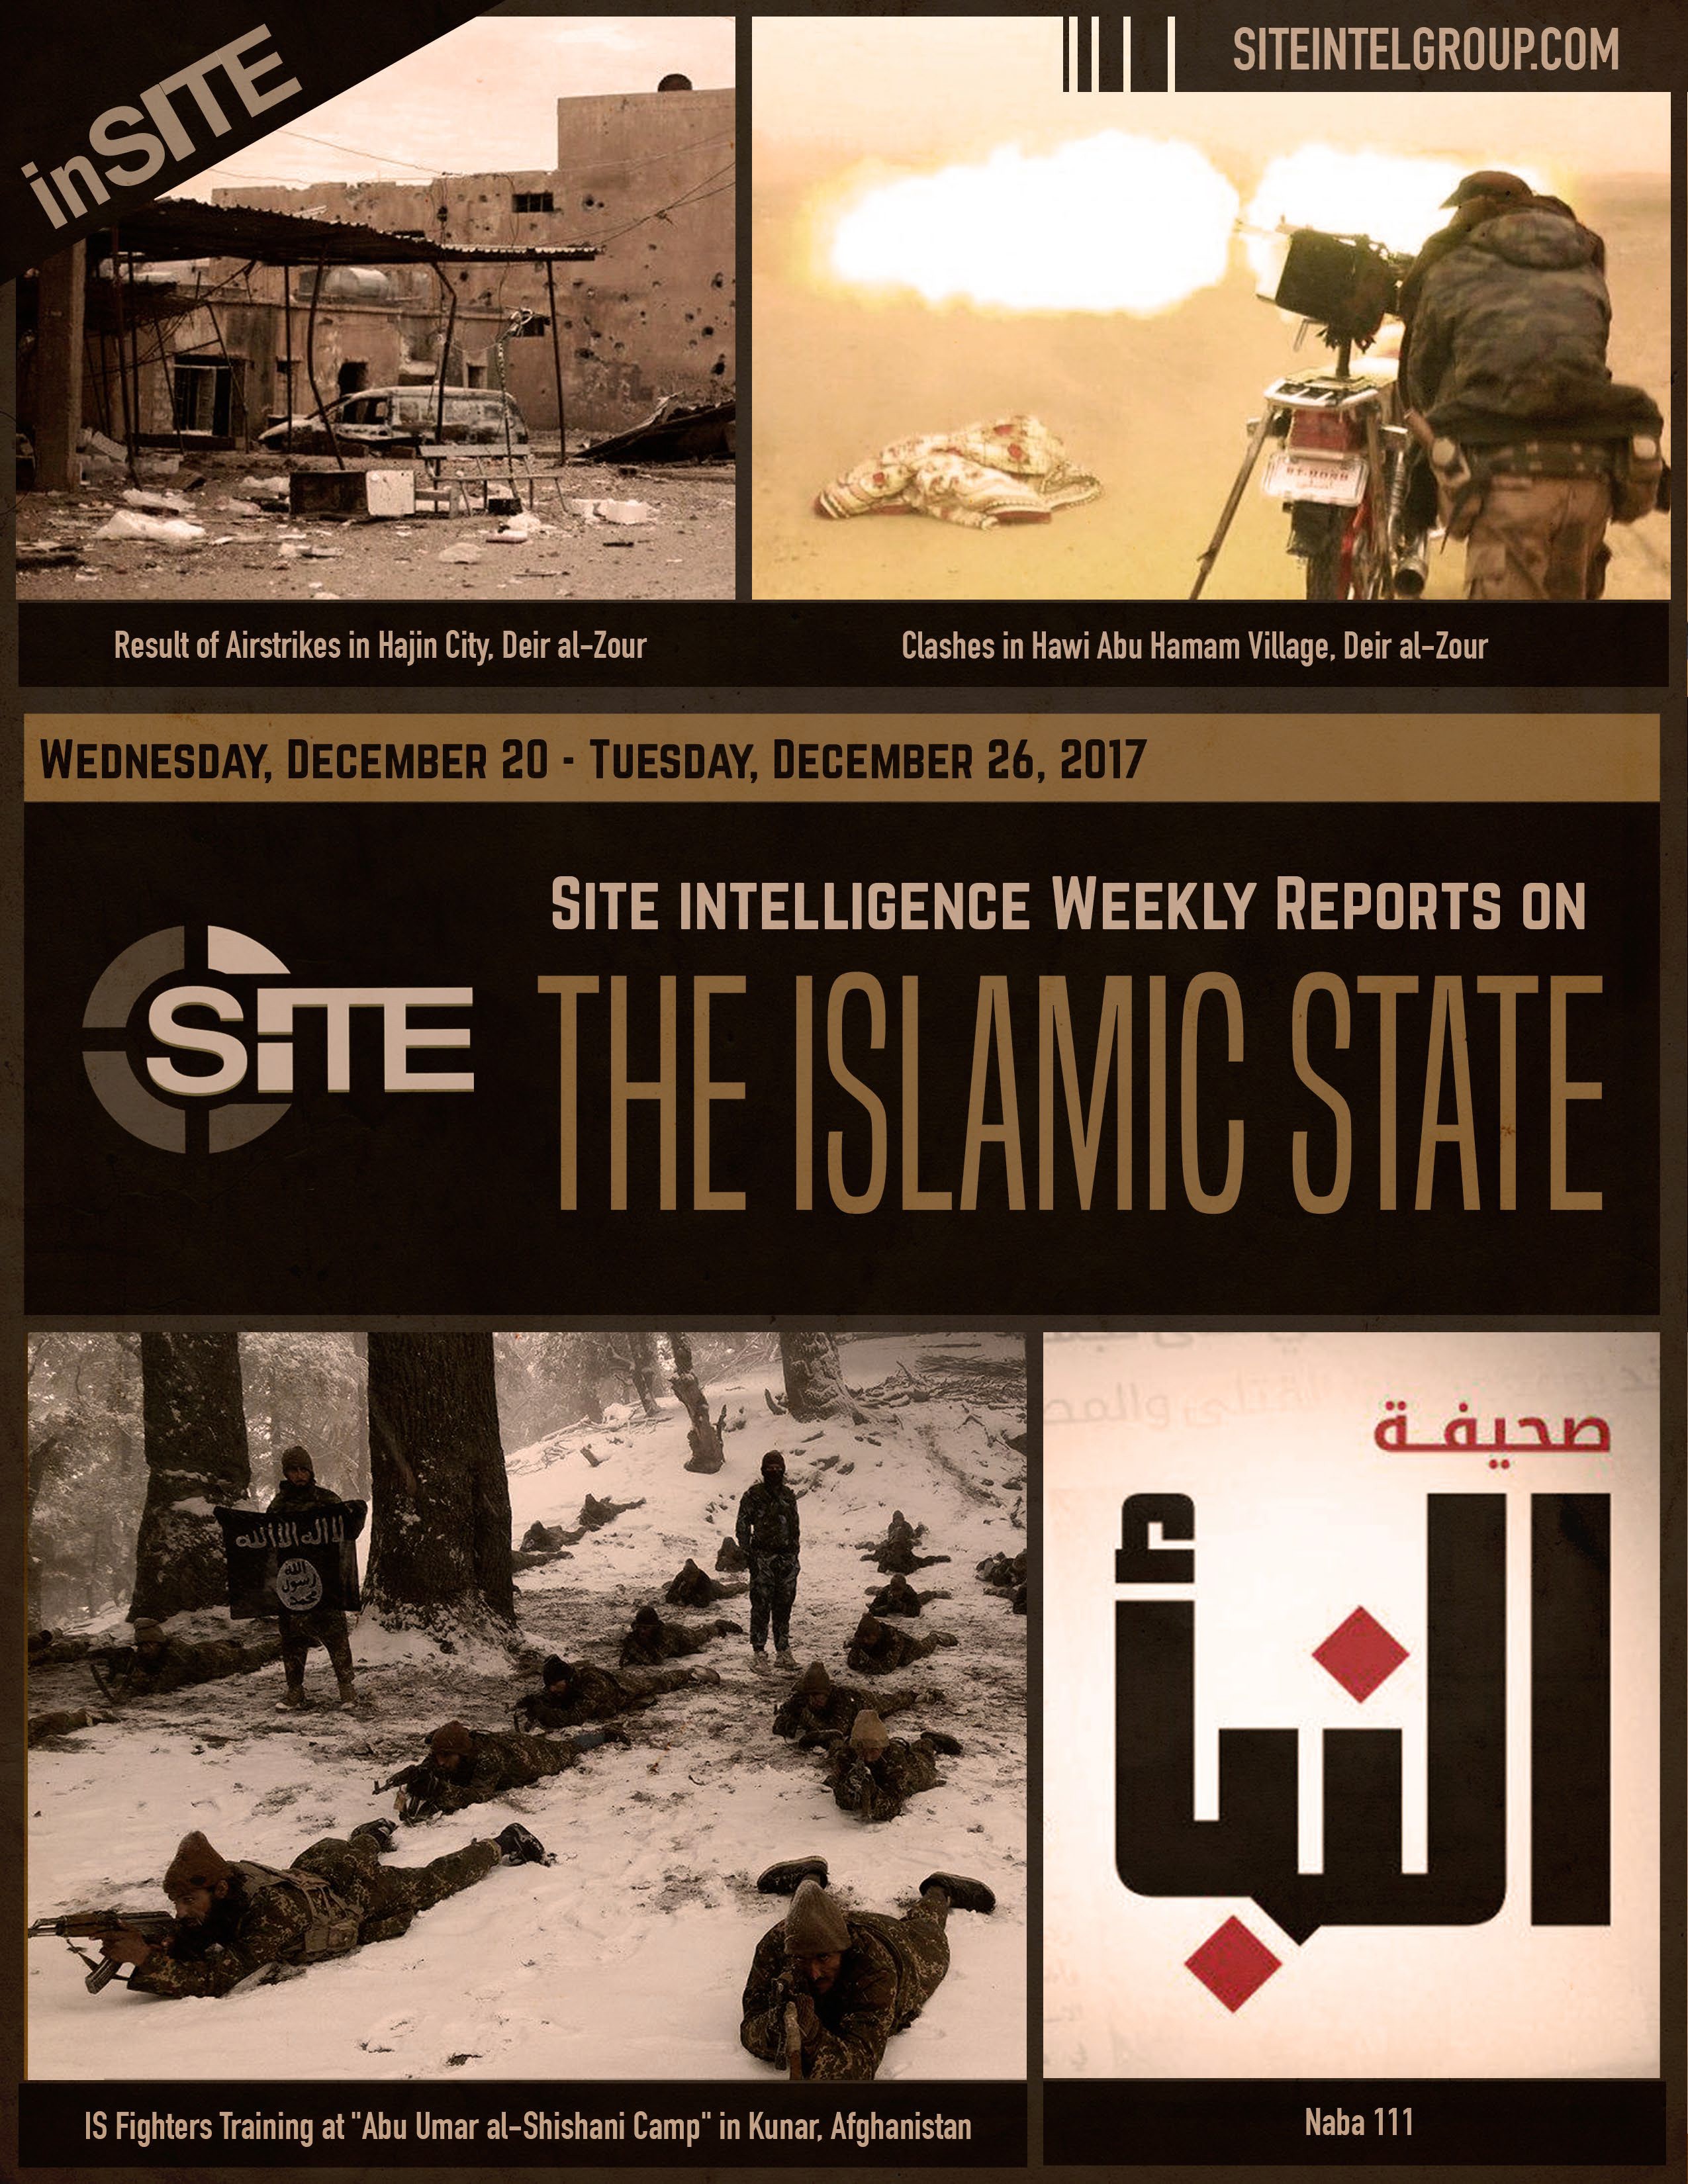 Weekly inSITE on the Islamic State, December 20-26